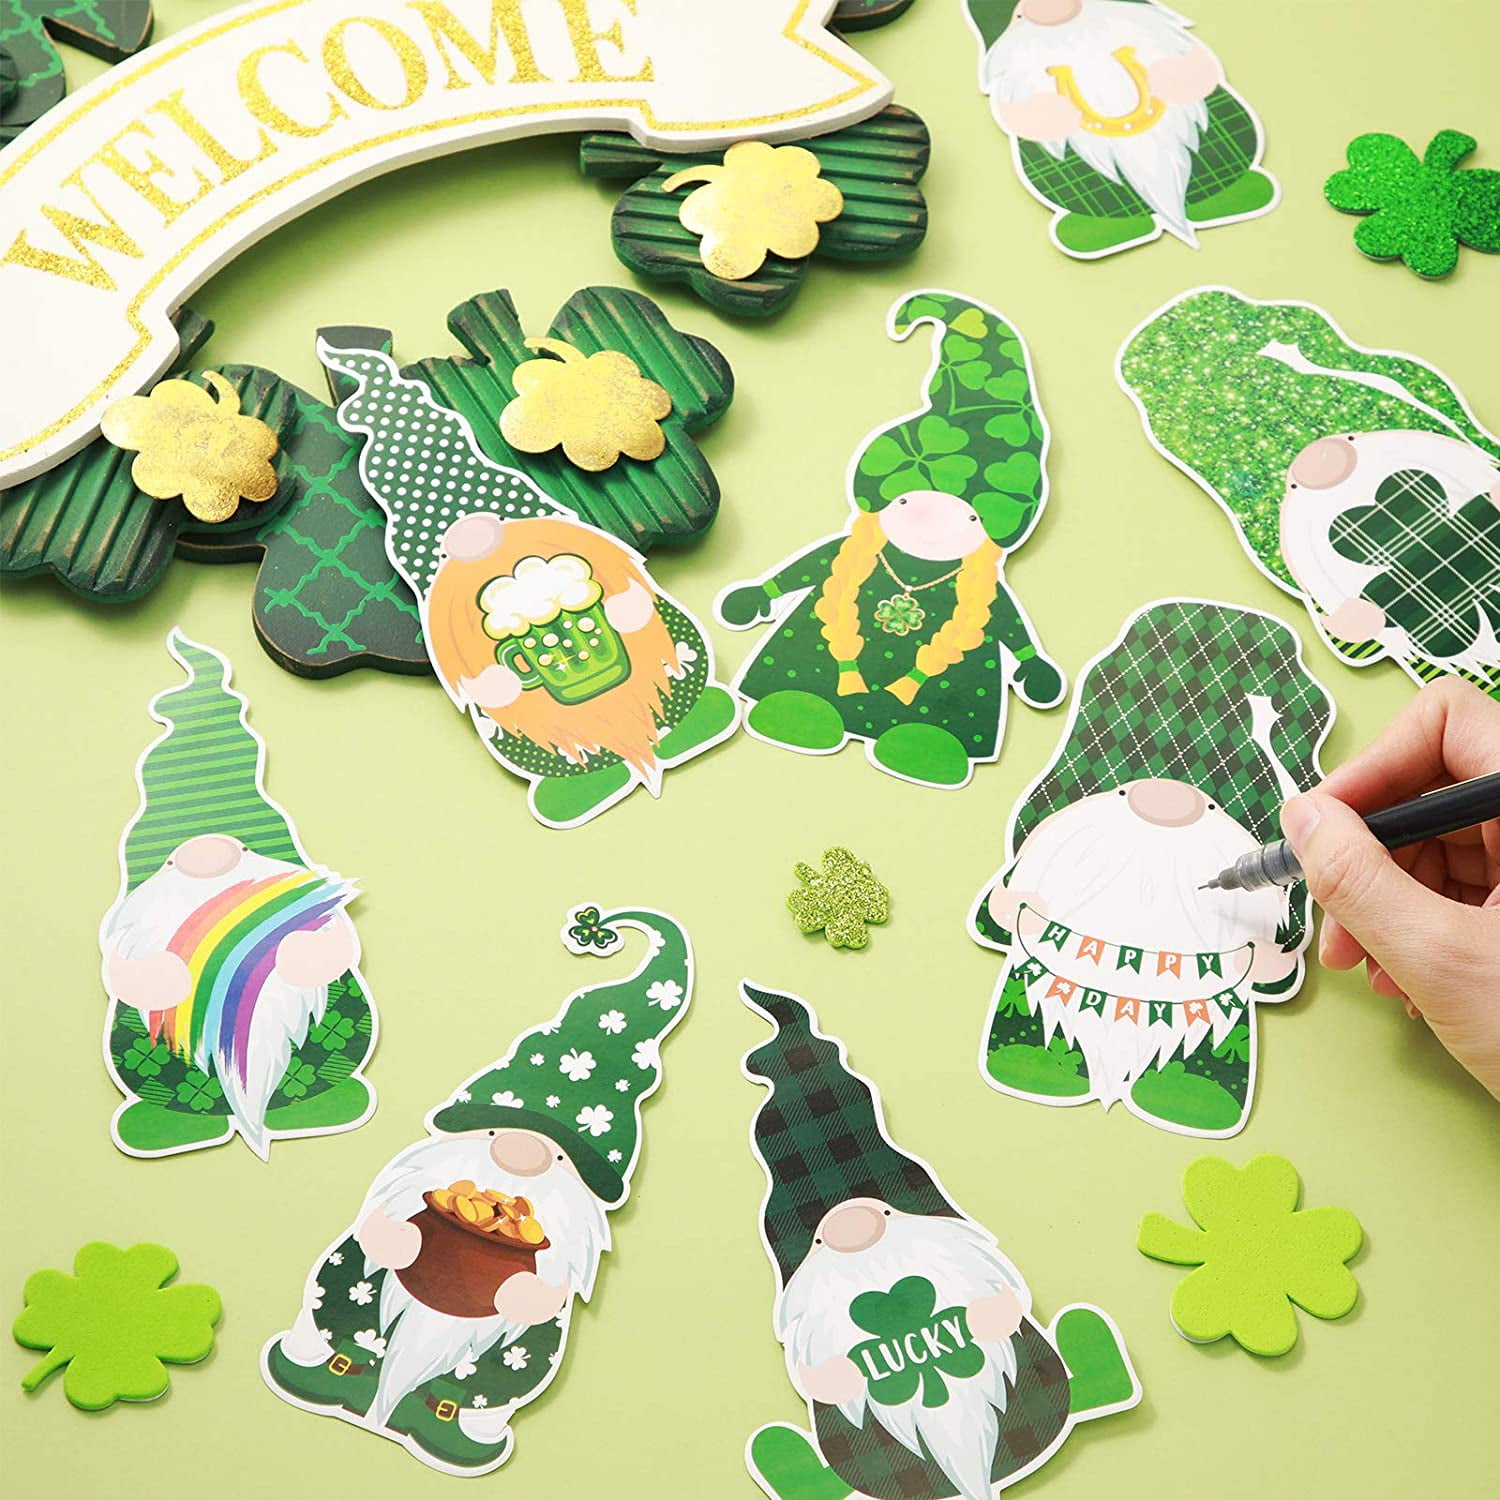 8 Designs 40 Pieces St Patricks Day Cut-Outs Irish Stickers Gnomes Cut-Outs Classroom Decoration with Glue Point Dots for St Patrick’s Day Party Decorations Bulletin Board School Party Supplies 